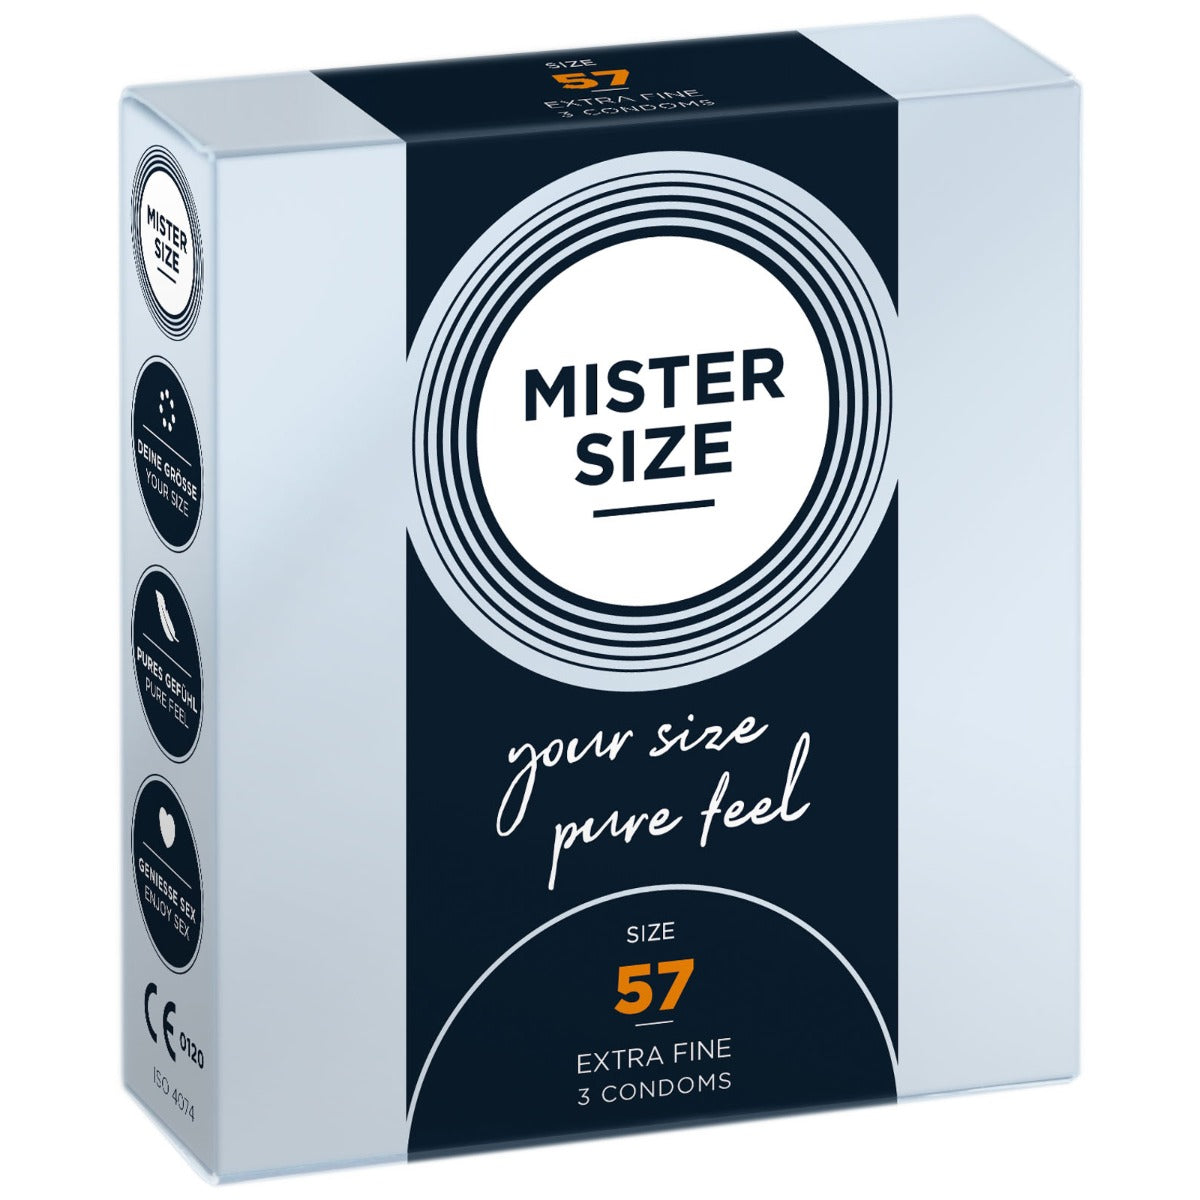 Condoms MISTER SIZE - pure feel Condoms - Size 57 mm (3 pack)   